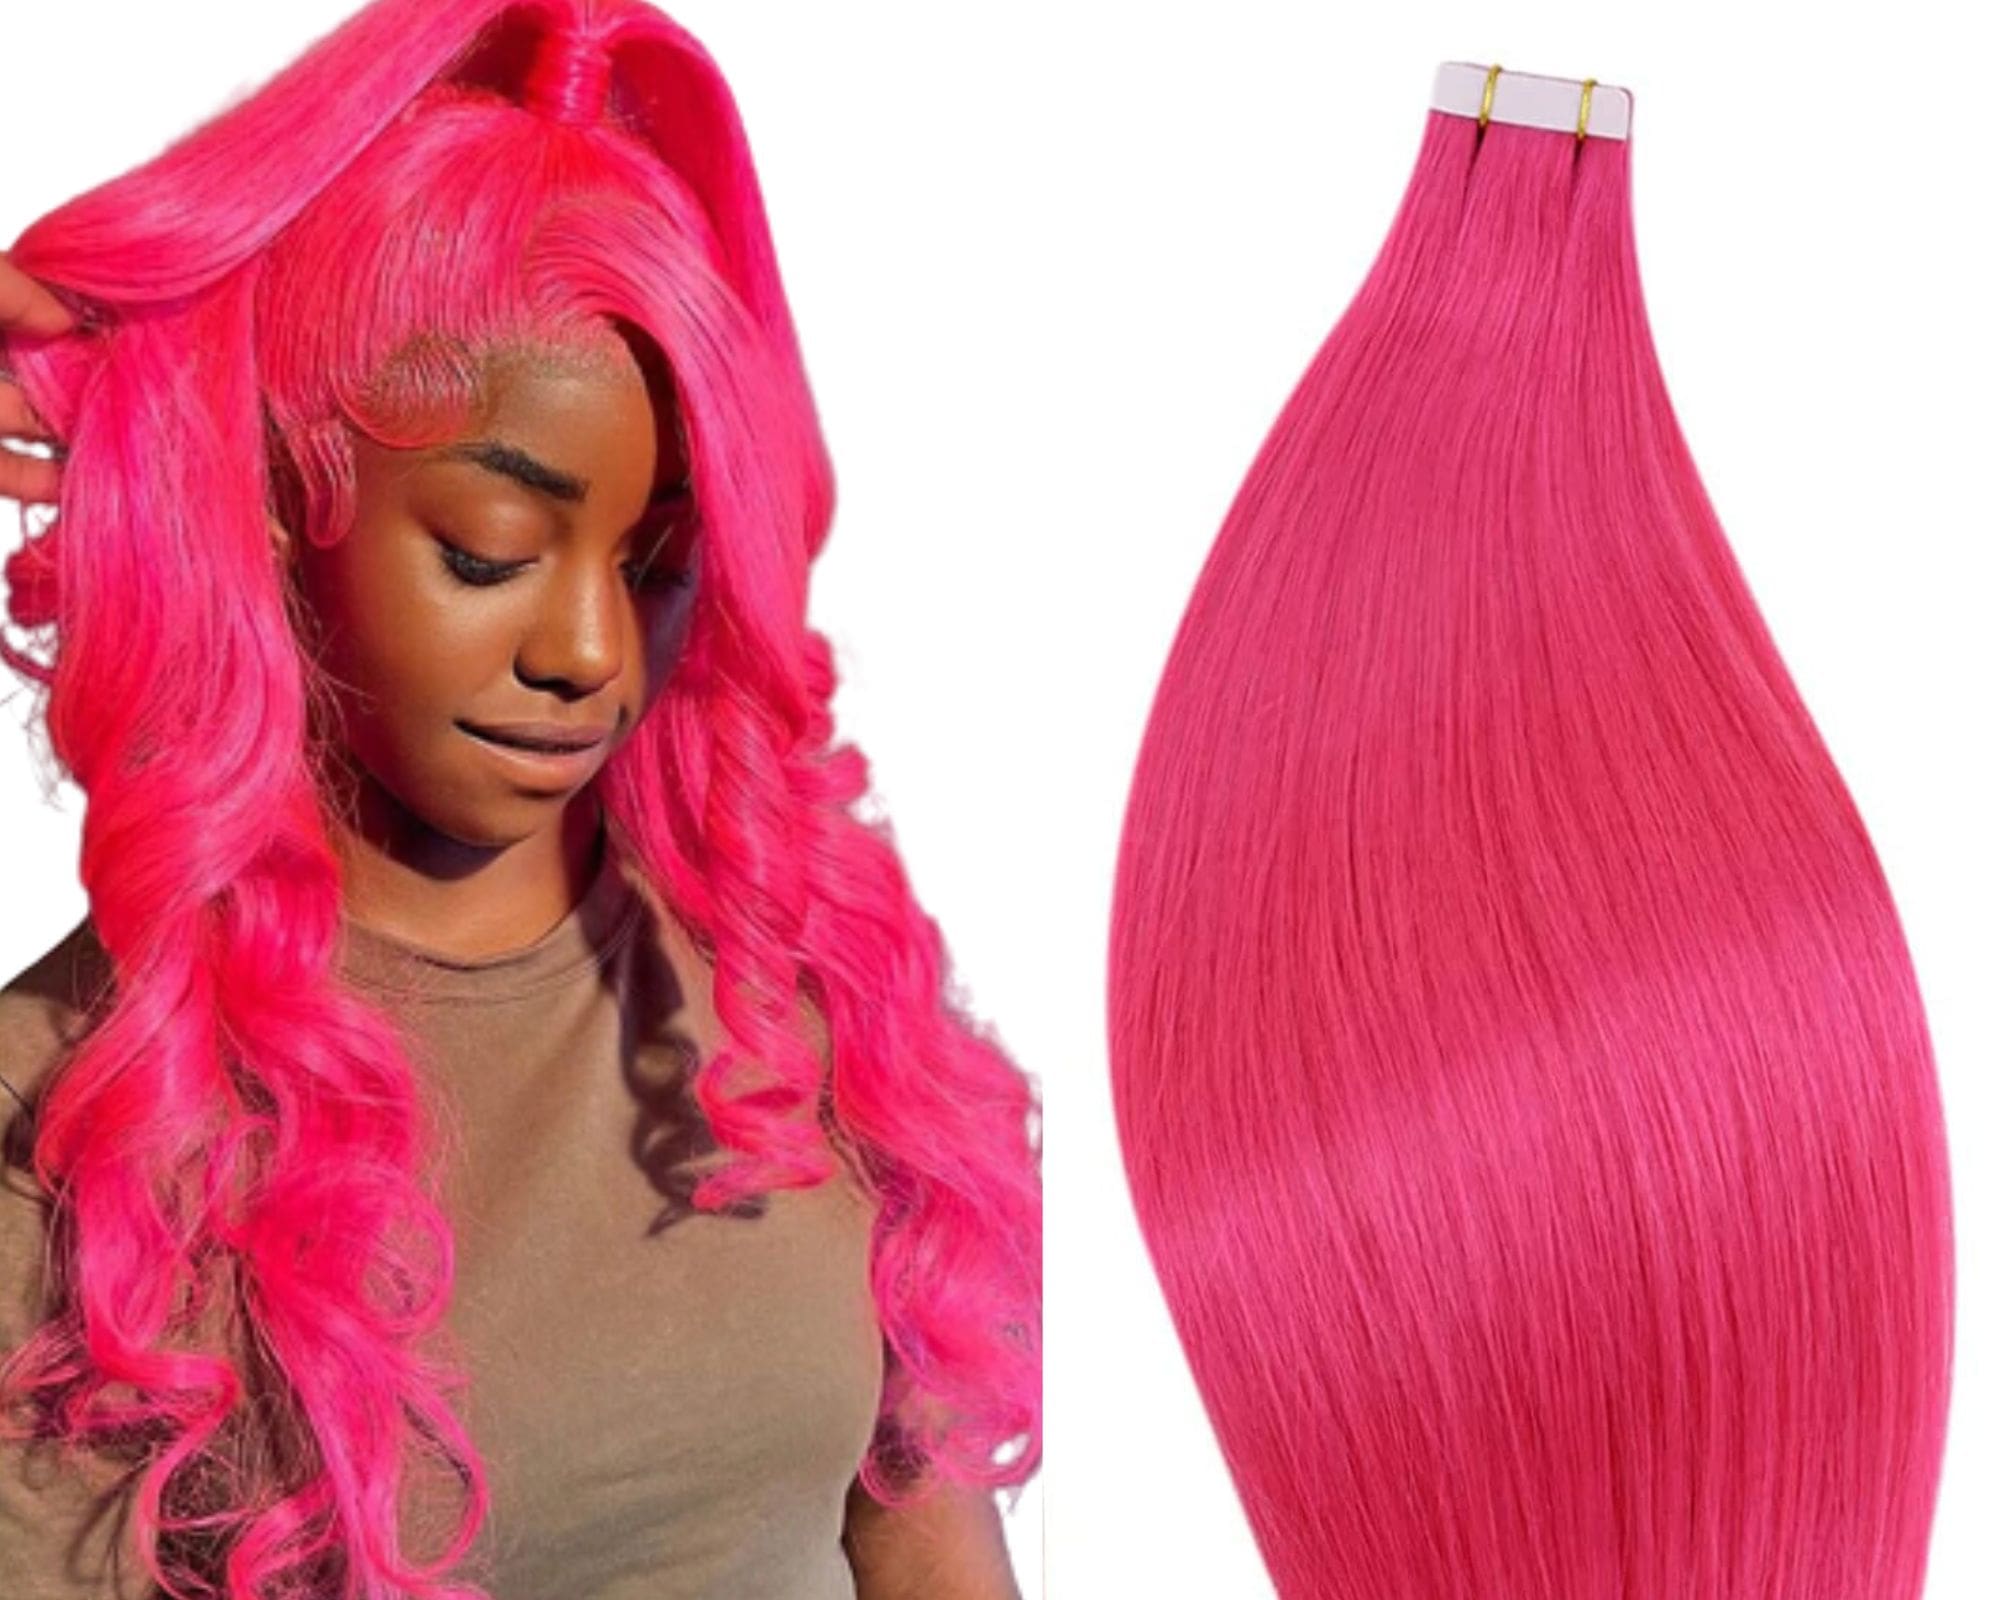 Pink Curly Hair Extensions (Head)